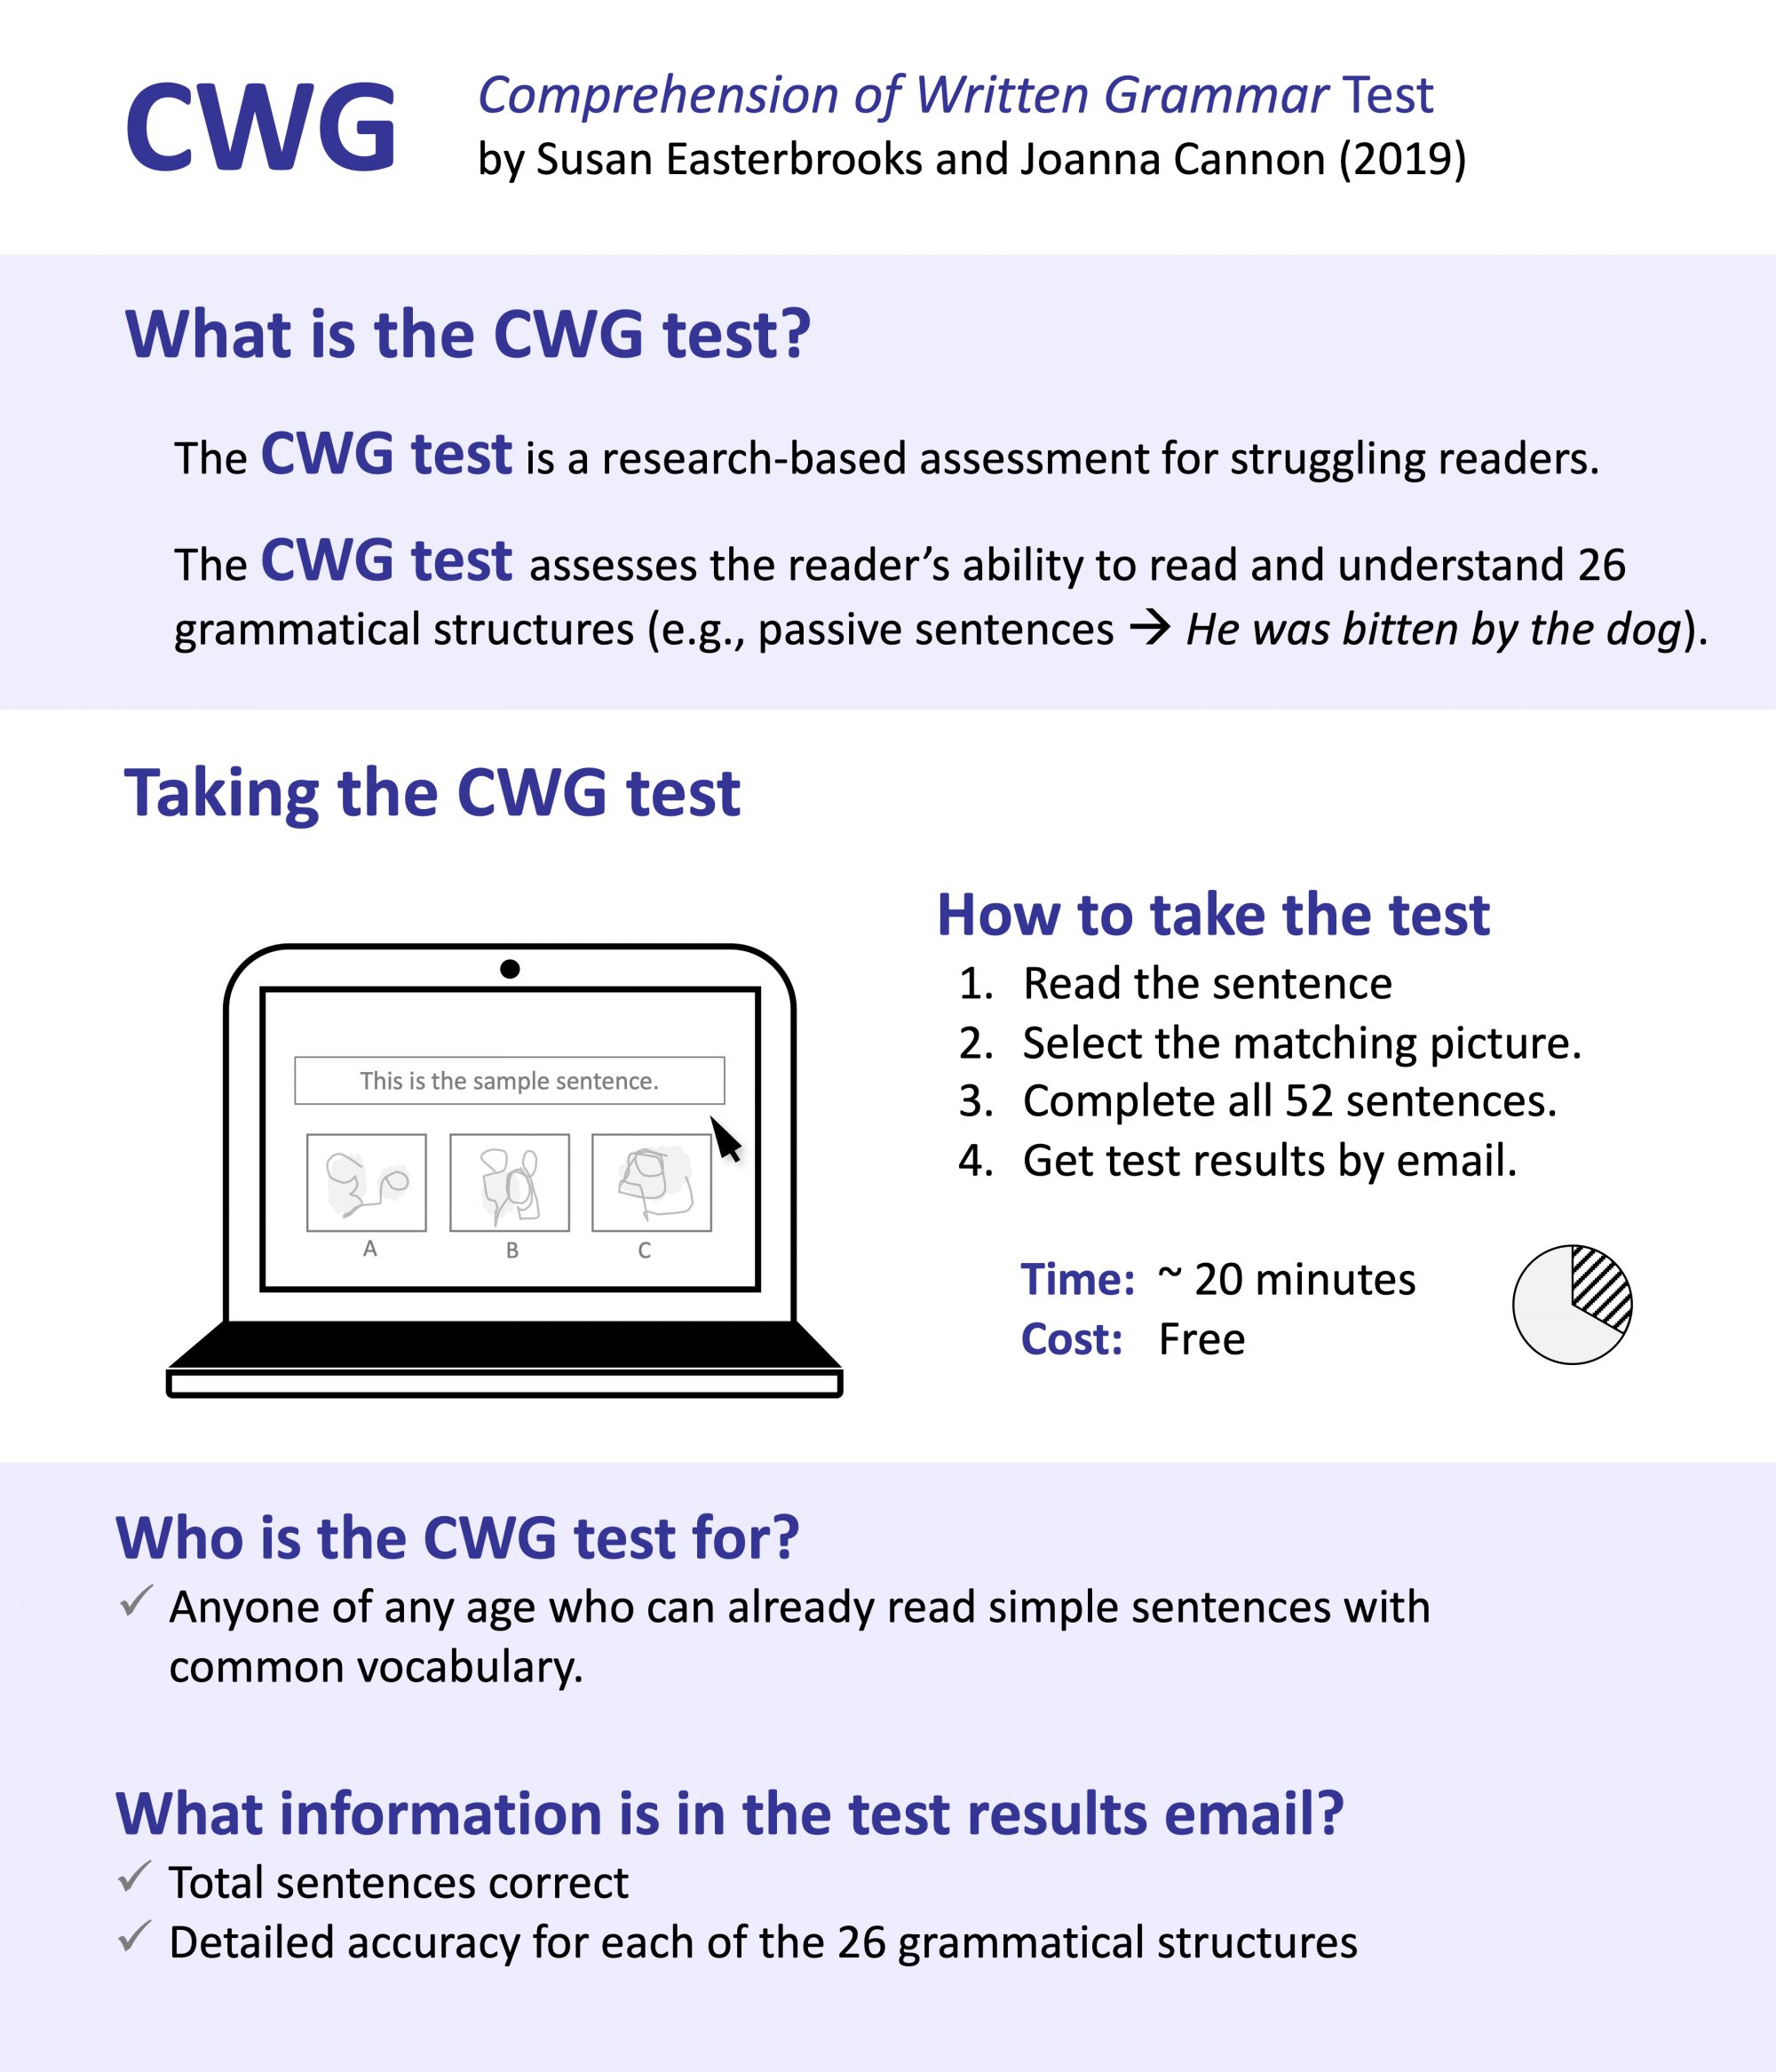 The image is divided into four sections from top to bottom. The top section heading is CWG, Comprehension of Written Grammar Test by Susan Easterbrooks and Joanna Cannon, 2019. The second section heading is What is the CWG test? The CWG test is a research-based assessment for struggling readers. The CWG test assesses the reader's ability to read and understand 26 grammatical structures (as in passive sentences such as 'He was bitten by the dog'). The third section heading is Taking the CWG test. There is an image of an open laptop with the format of the test laid out on the screen. A top box on the screen has the sentence 'This is the sample sentence.' Below that are three boxes labeled A, B, and C with blurred images on them. The text to the right of the laptop image reads How to take the test. One, read the sentence. Two, select the matching picture. Three, complete all 52 sentences. Four, get test results by email. Time, approximately 20 minutes. Cost, Free. The fourth section reads Who is the CWG test for? Anyone of any age who can already read simple sentences with common vocabulary. What information is in the test results email? Total sentences correct. Detailed accuracy for each of the 26 grammatical structures.